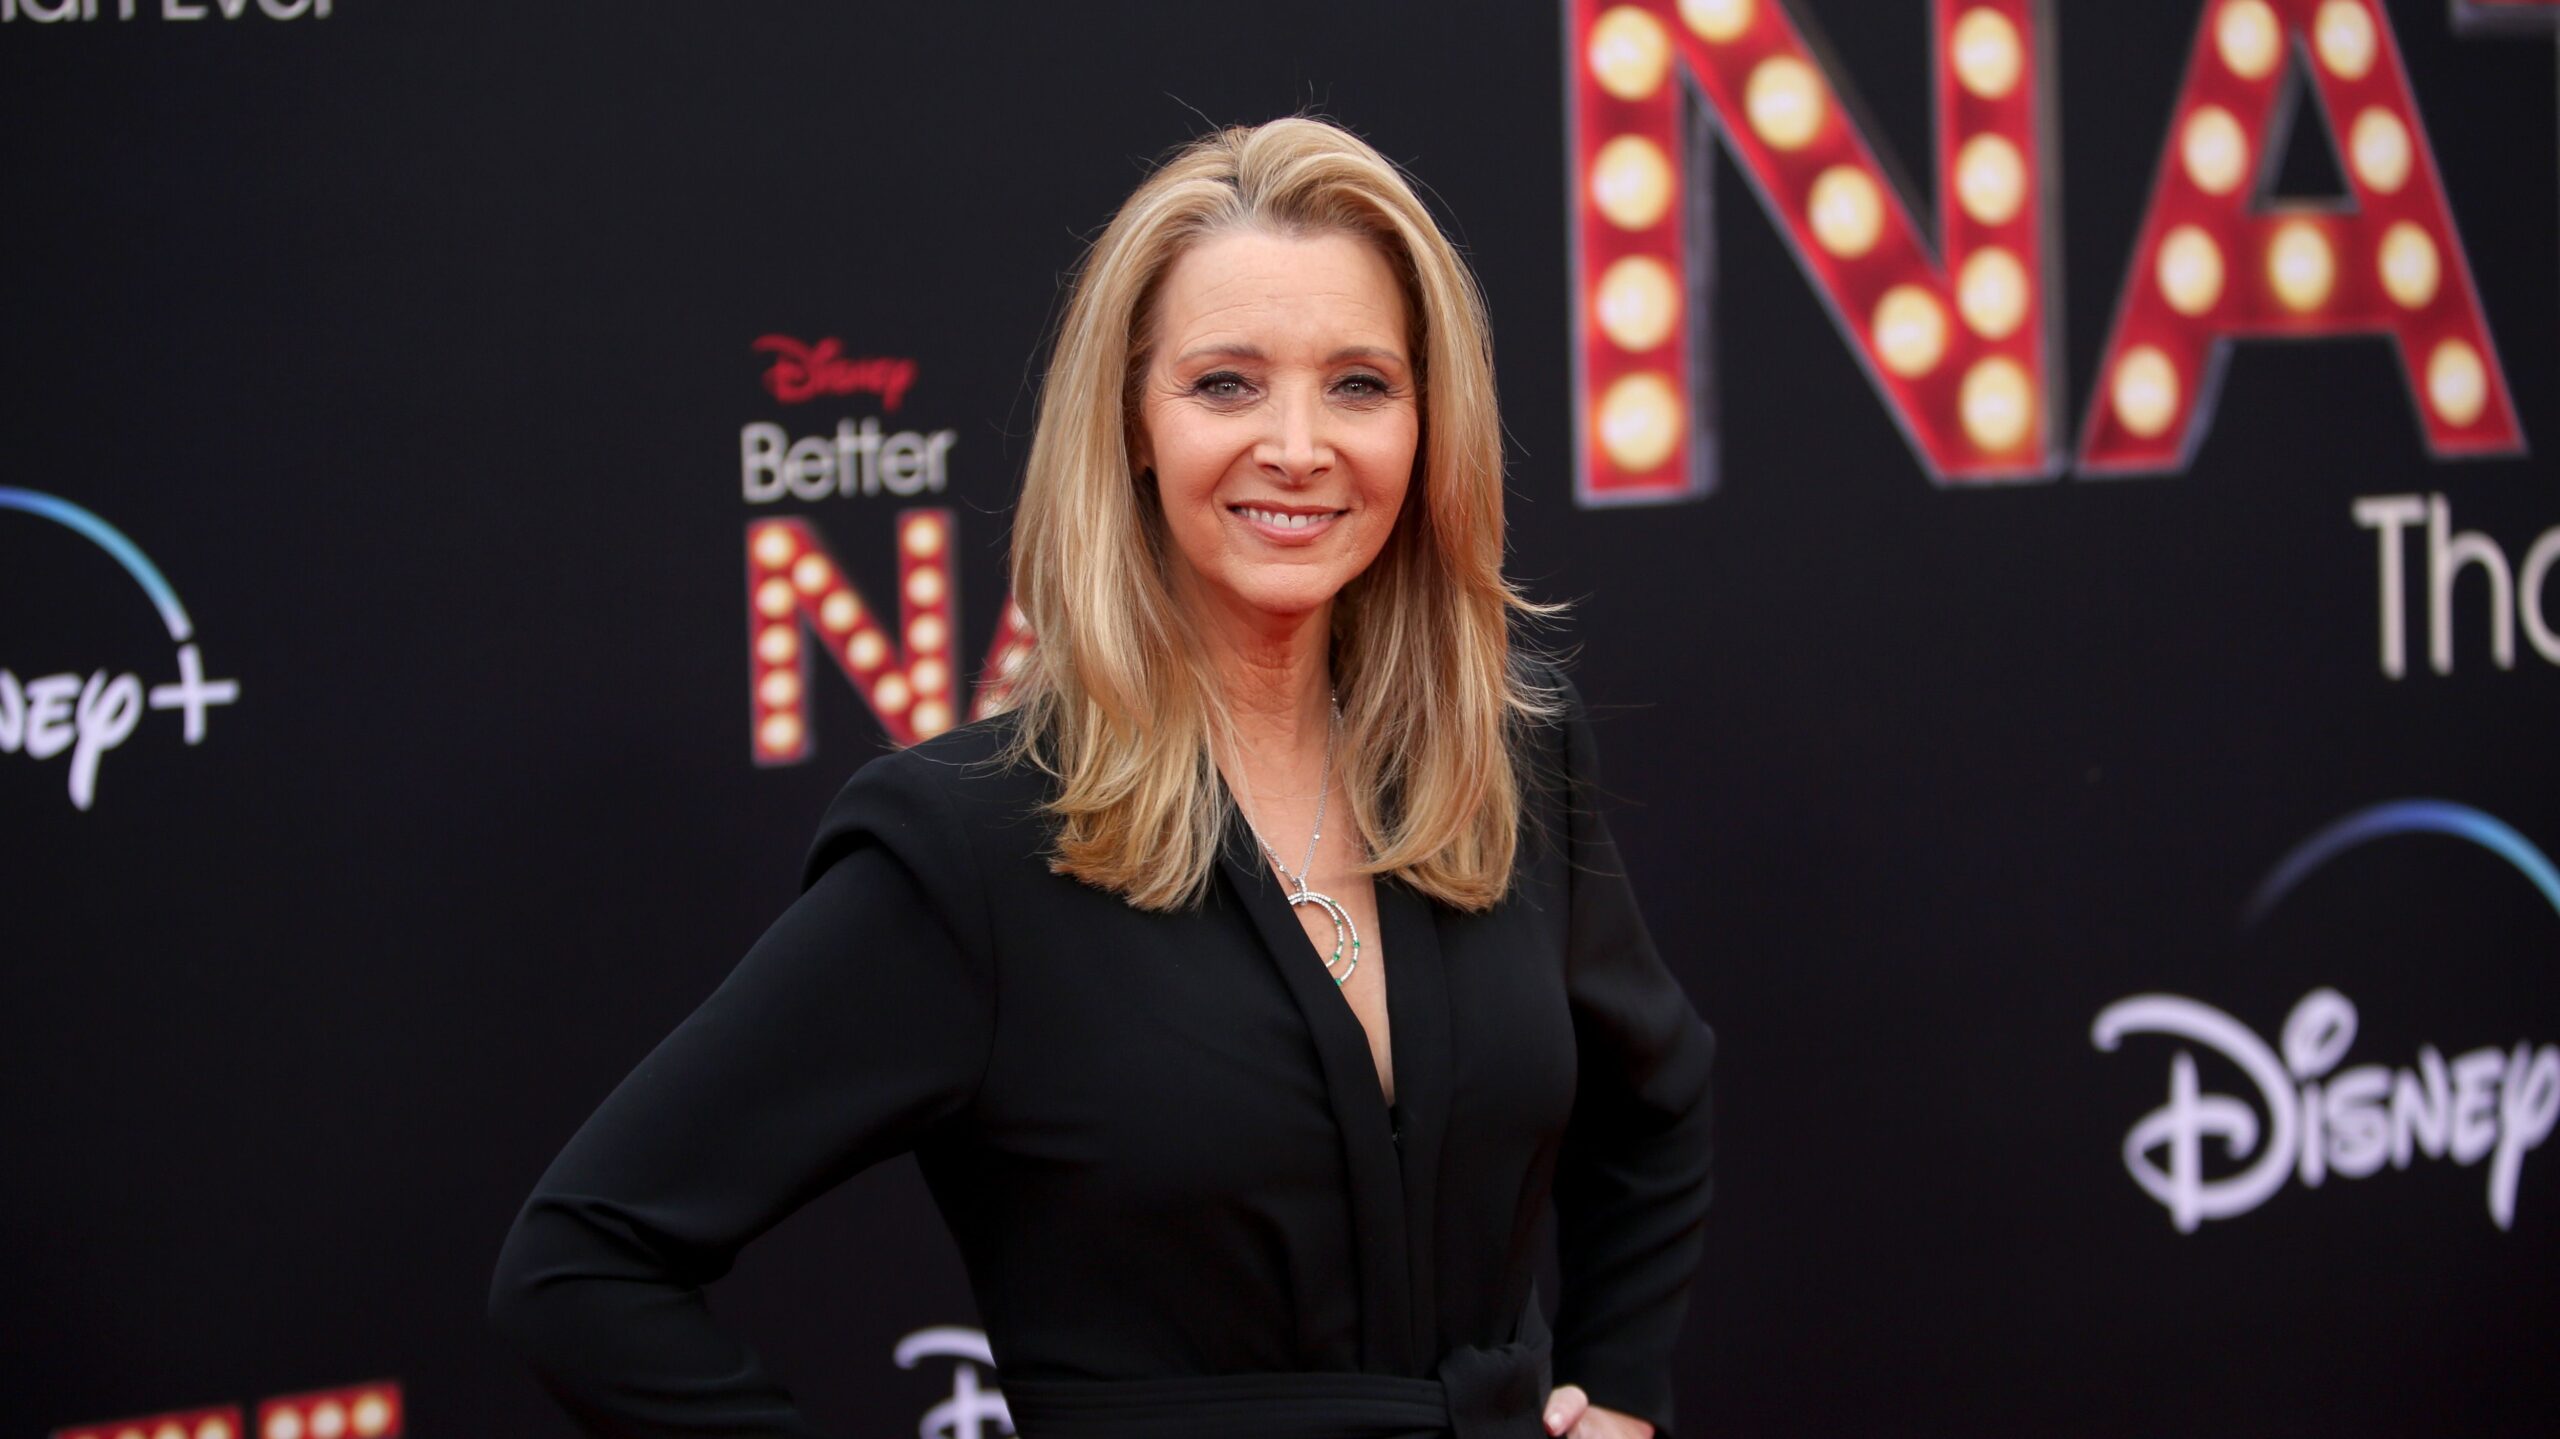 Lisa Kudrow attends the Los Angeles Premiere of Disney's "Better Nate Than Ever".